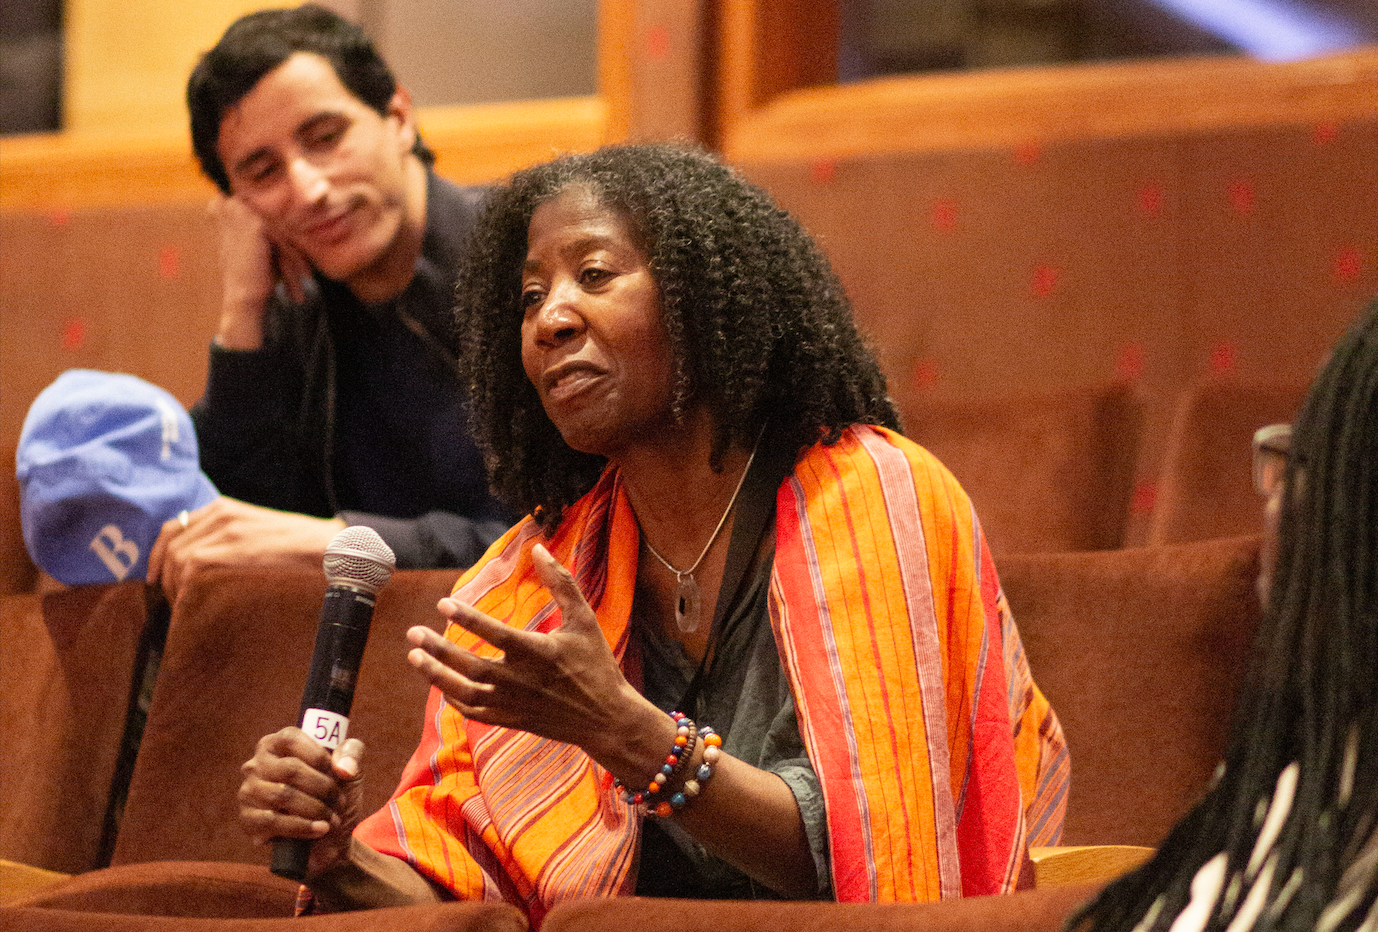 An older black woman, holding a microphone, asks Alice Diop a question during the Q+A portion of the event.